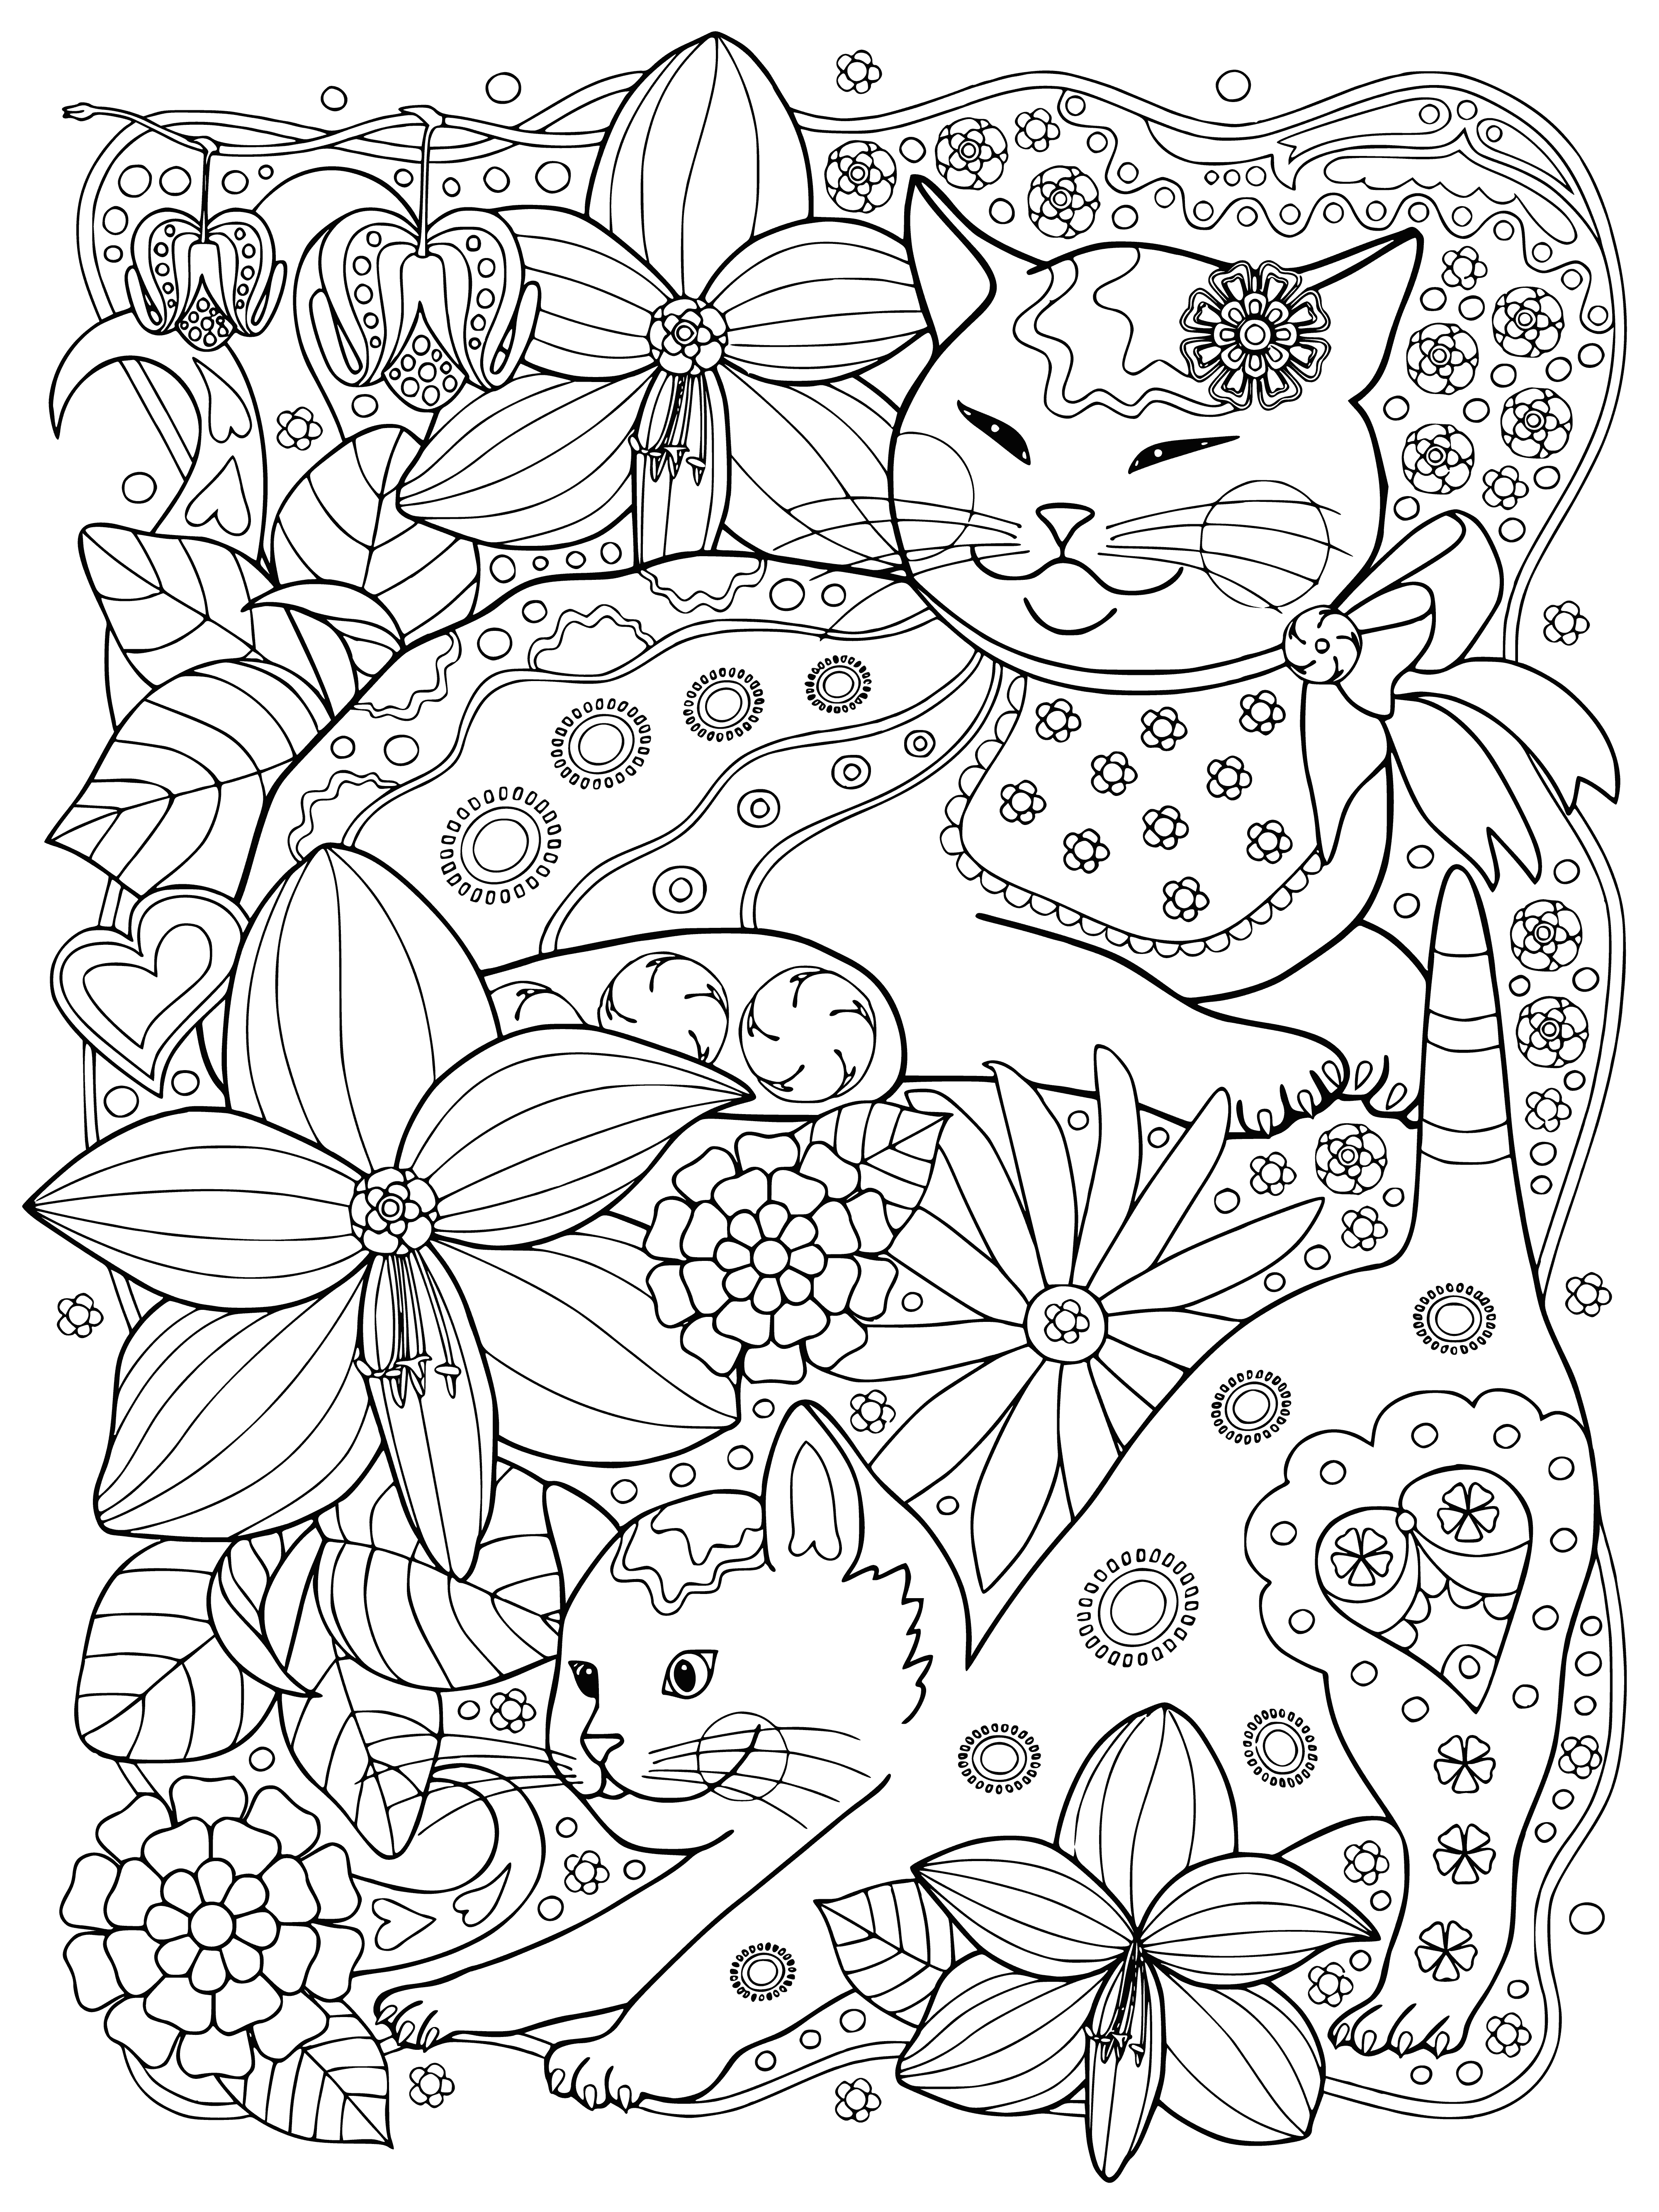 Cats with flowers coloring page